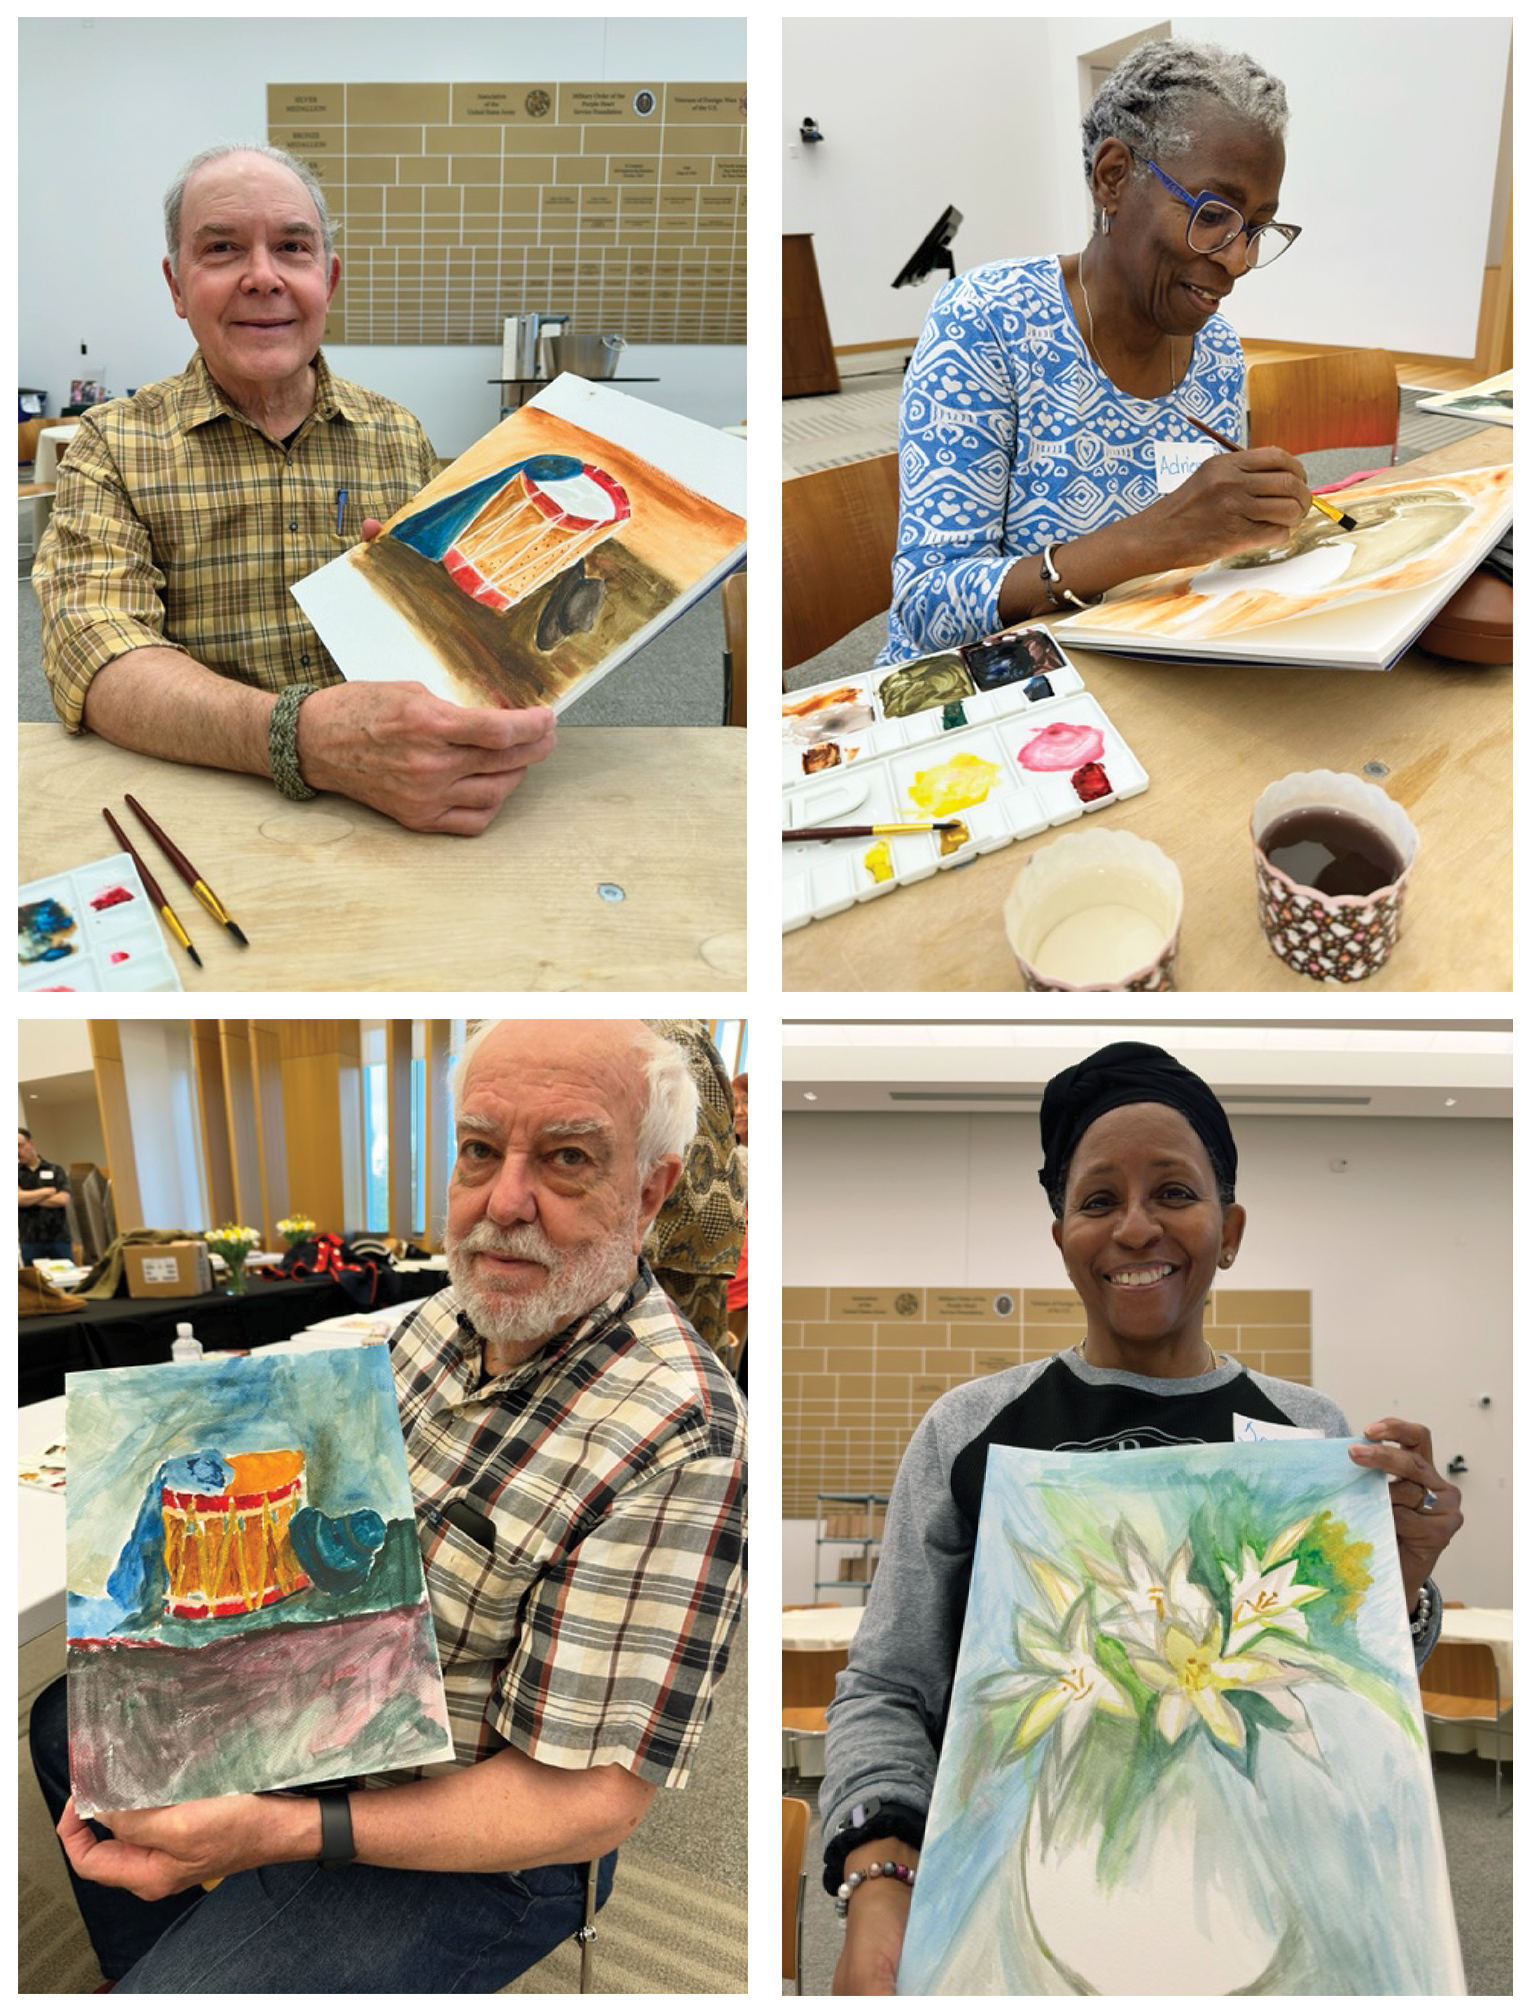 Patriot Art Foundation classes are as much about offering sense of community and connection as they are exploring the healing power of art. Veterans from across the region joined the in-person Veterans Day event last November.